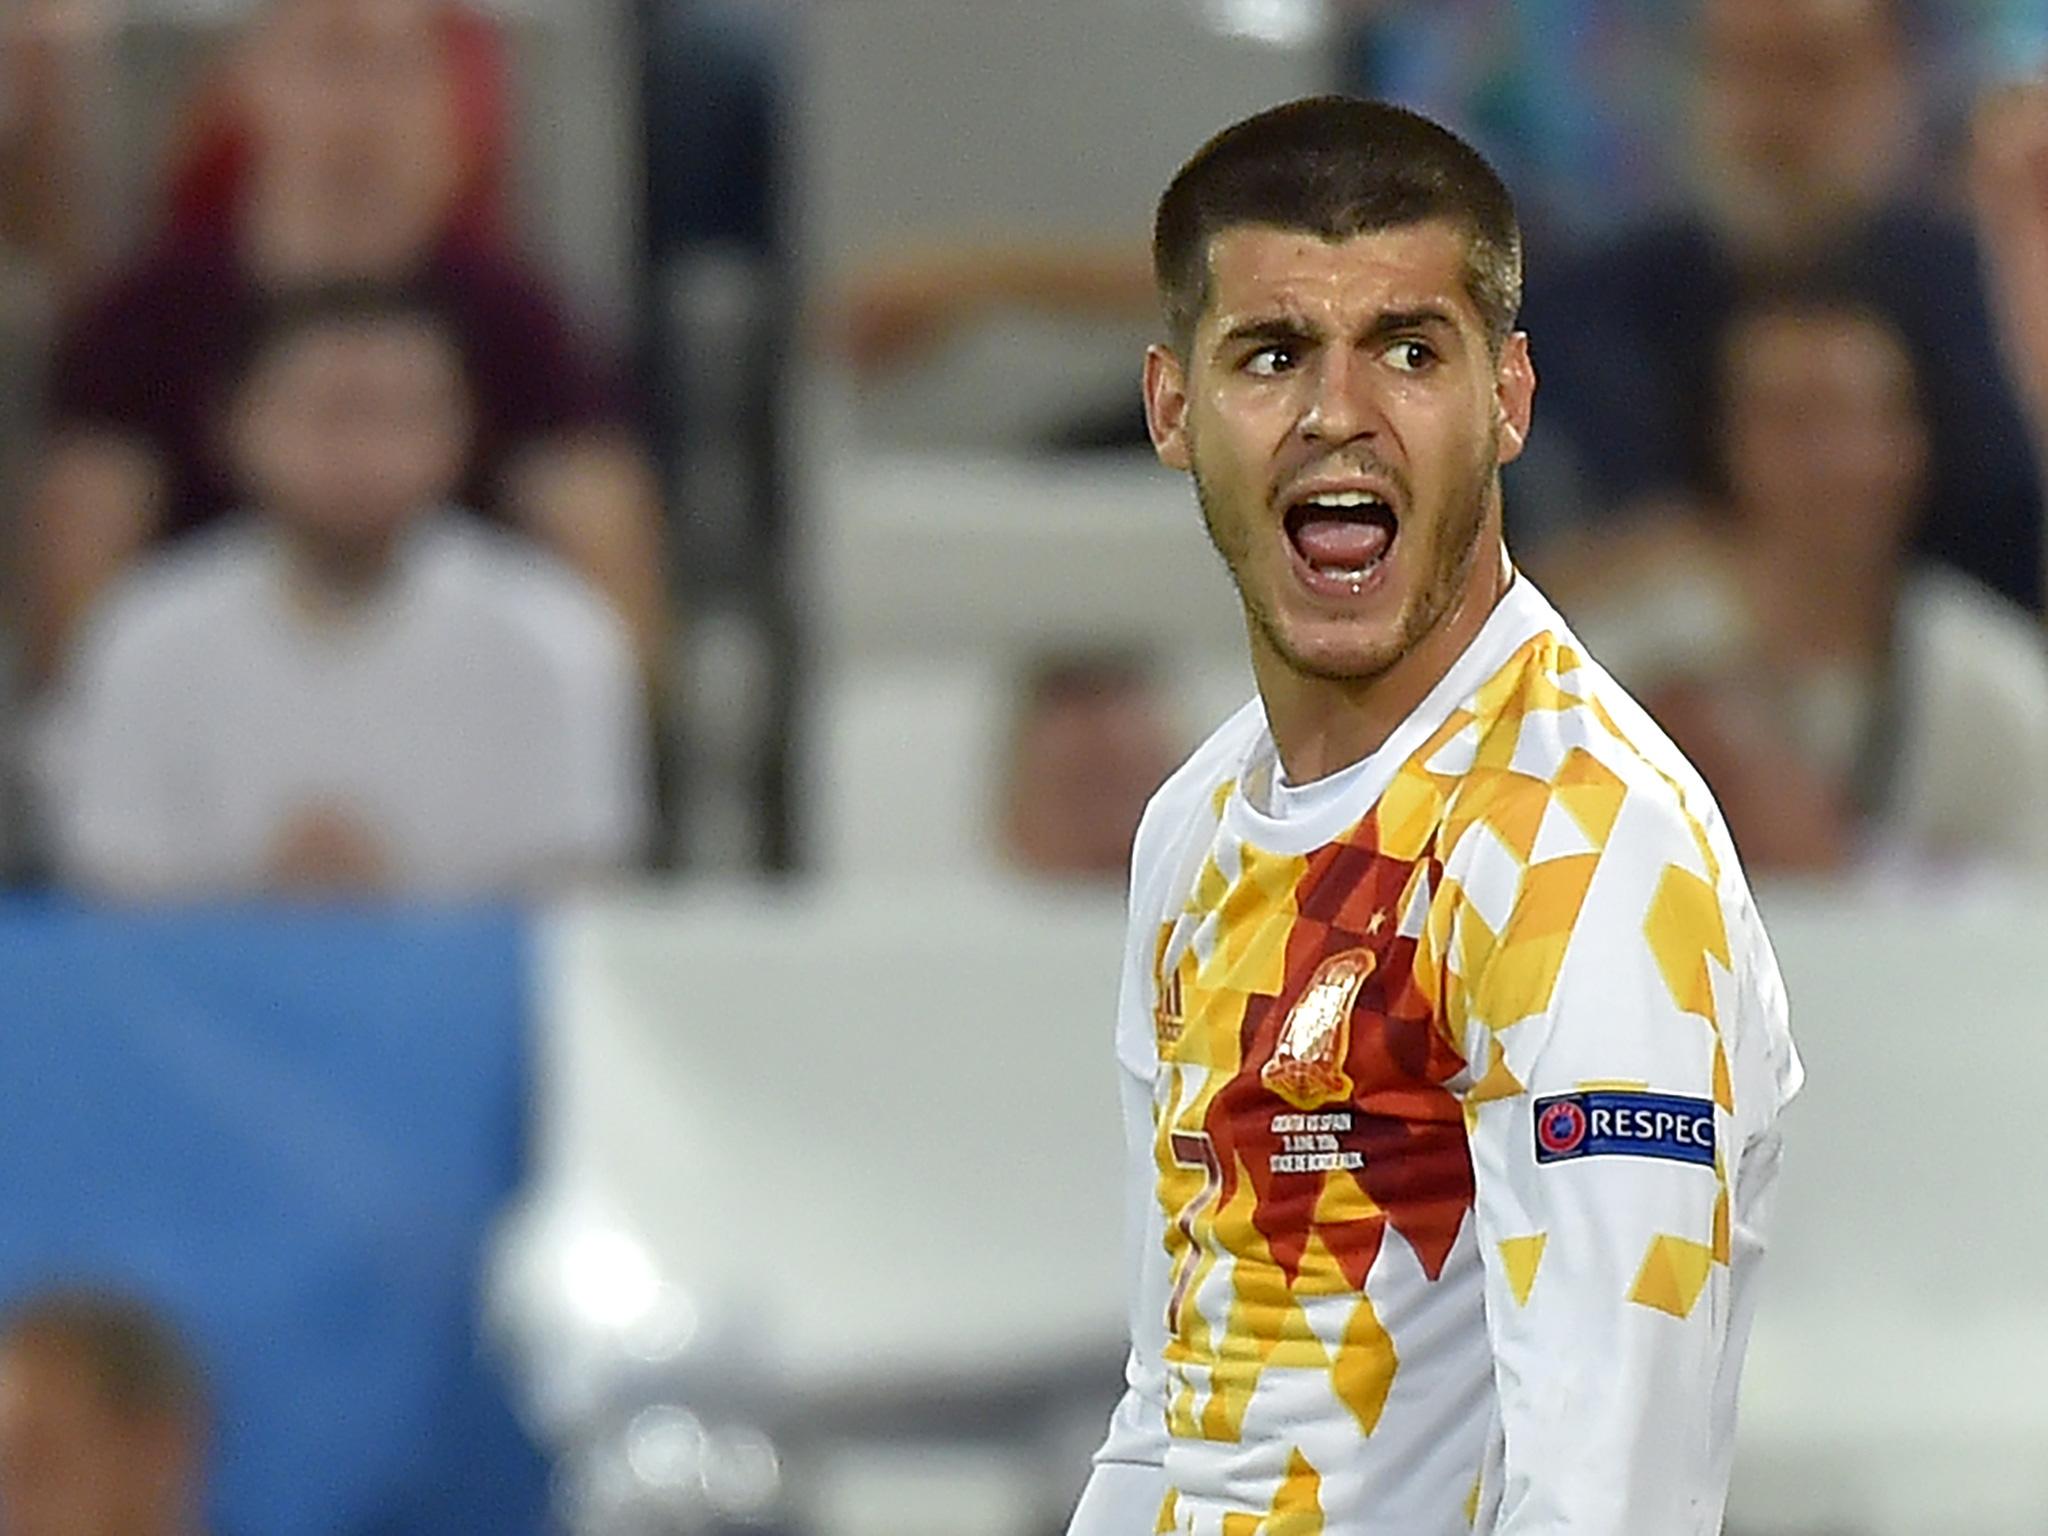 Morata starred in Spain's Euro 2016 campaign which was cut short by the Italians